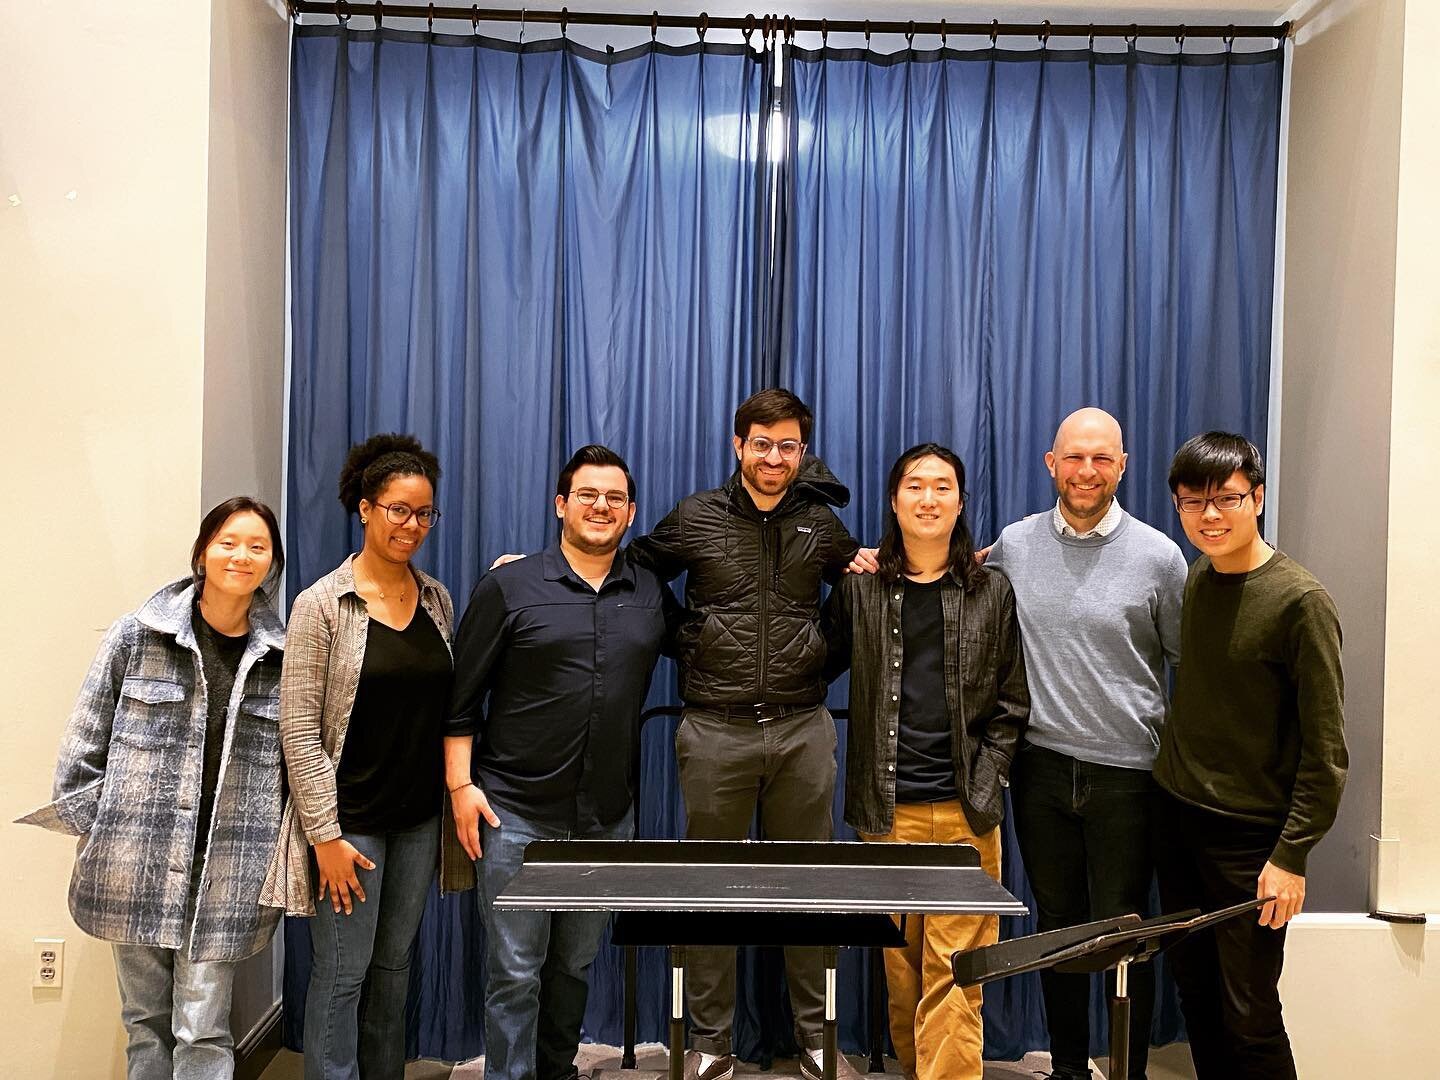 A great experience as always to work with the wonderful @peabodyinstitute conducting class on some Copland #AppalachianSpring &mdash; certainly one of the more treacherous tunes to conduct! Thanks for the invite, @marinalsop.conductor !

#conductor #